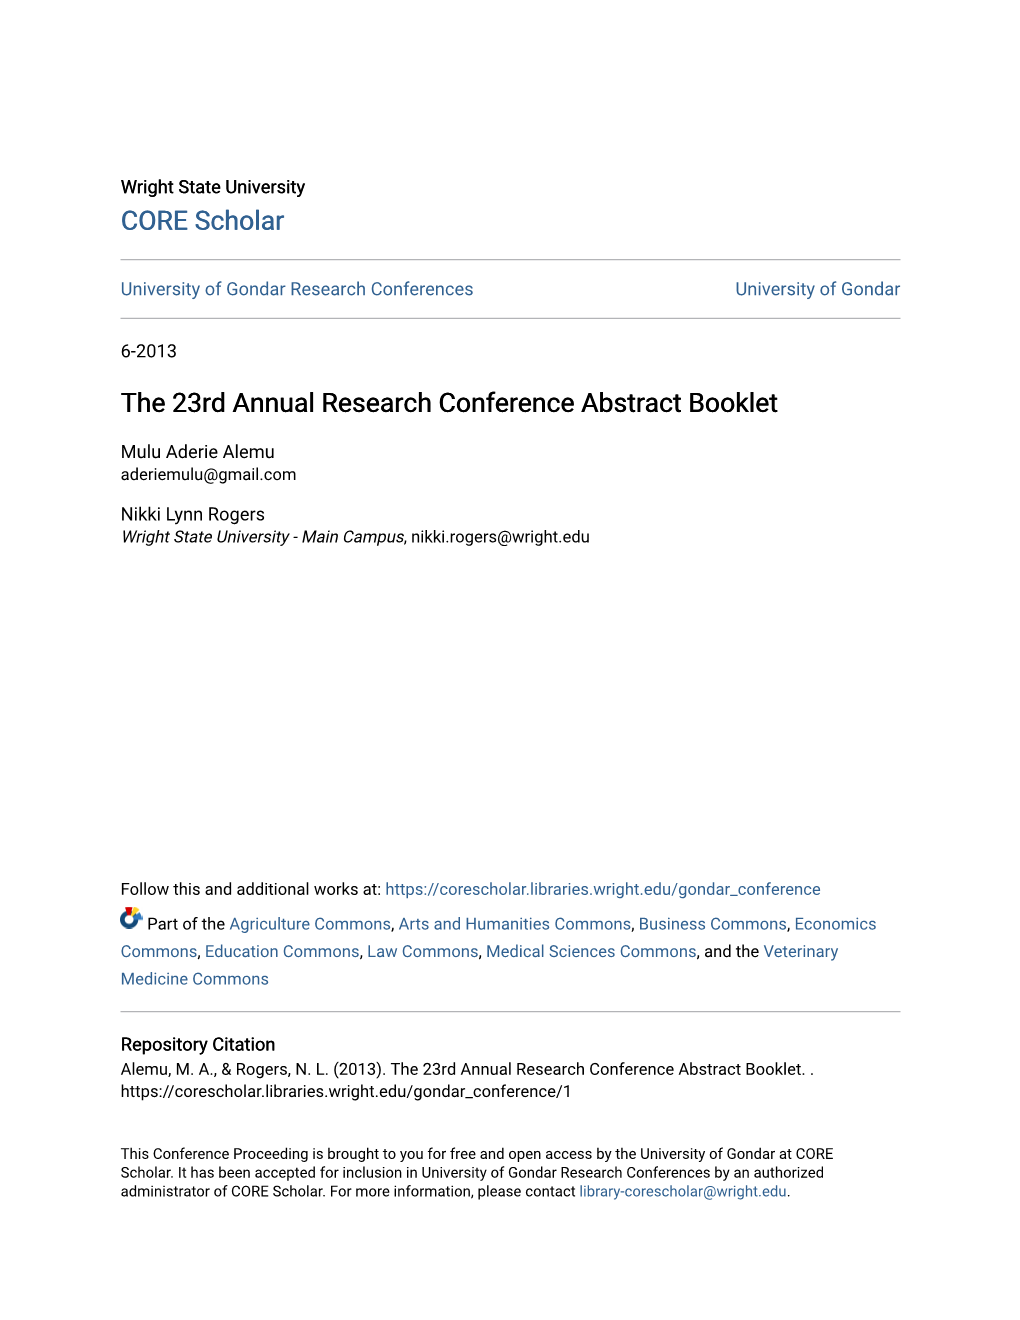 The 23Rd Annual Research Conference Abstract Booklet